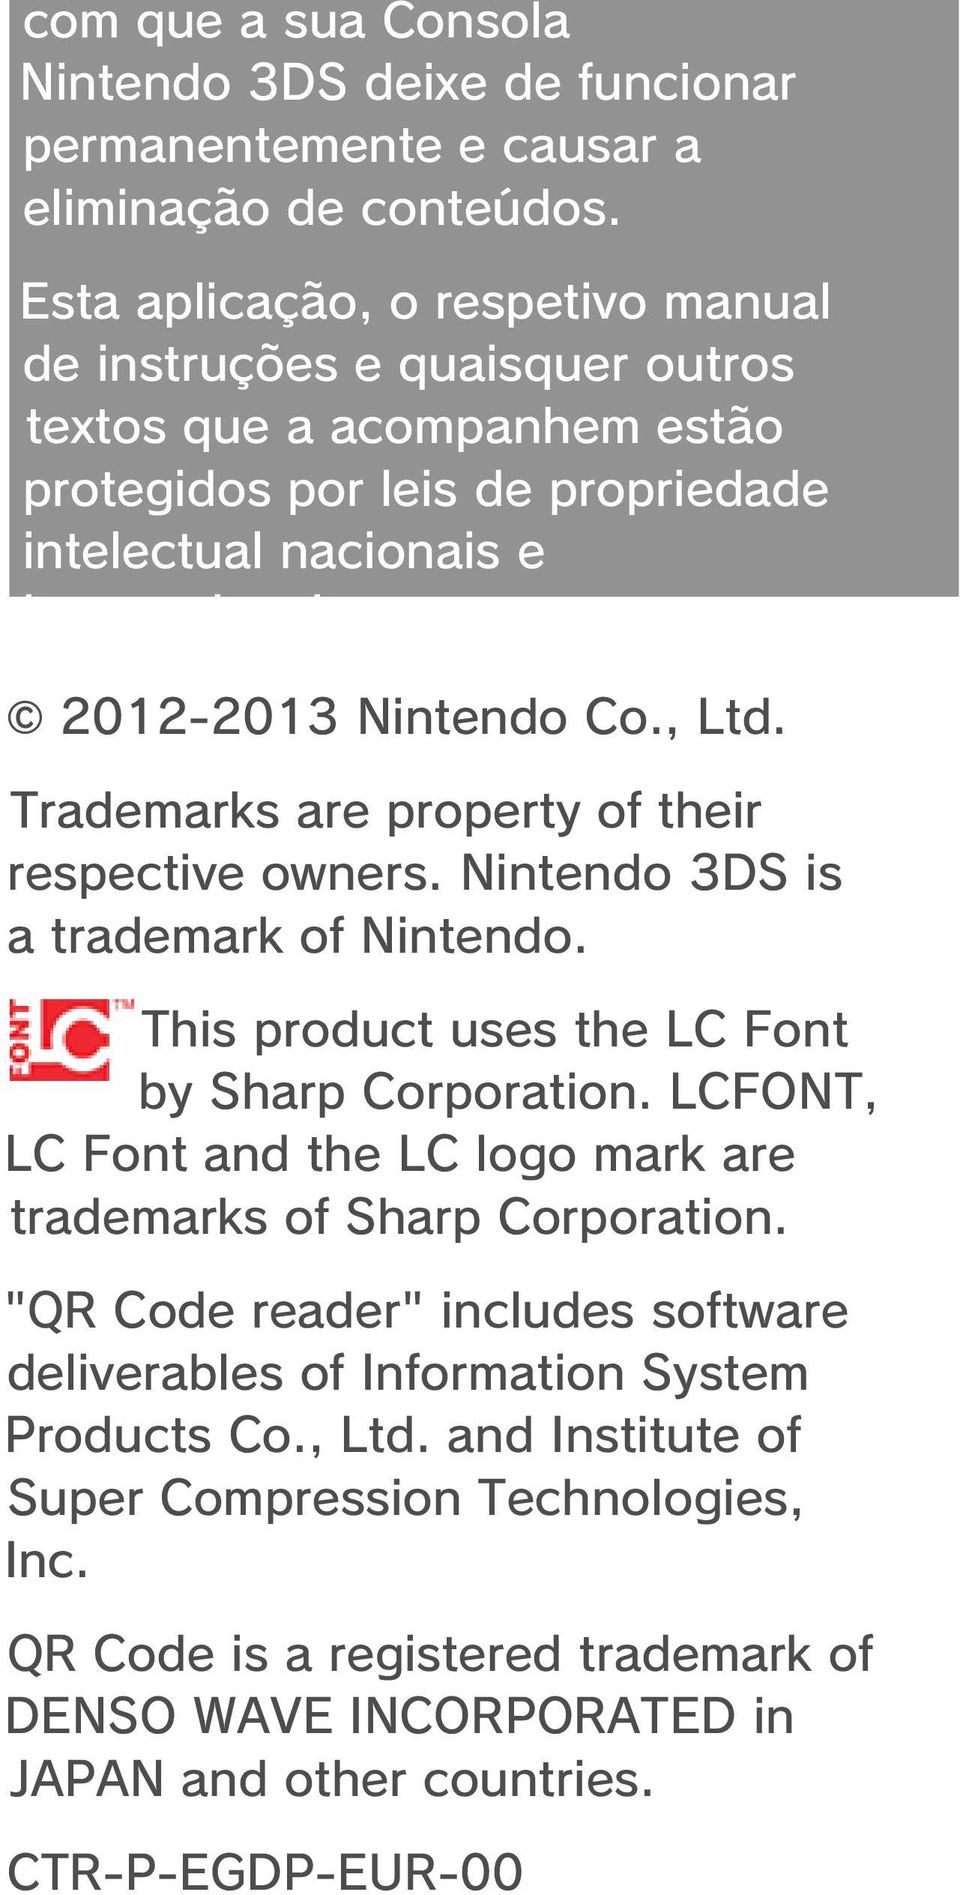 , Ltd. Trademarks are property of their respective owners. Nintendo 3DS is a trademark of Nintendo. This product uses the LC Font by Sharp Corporation.